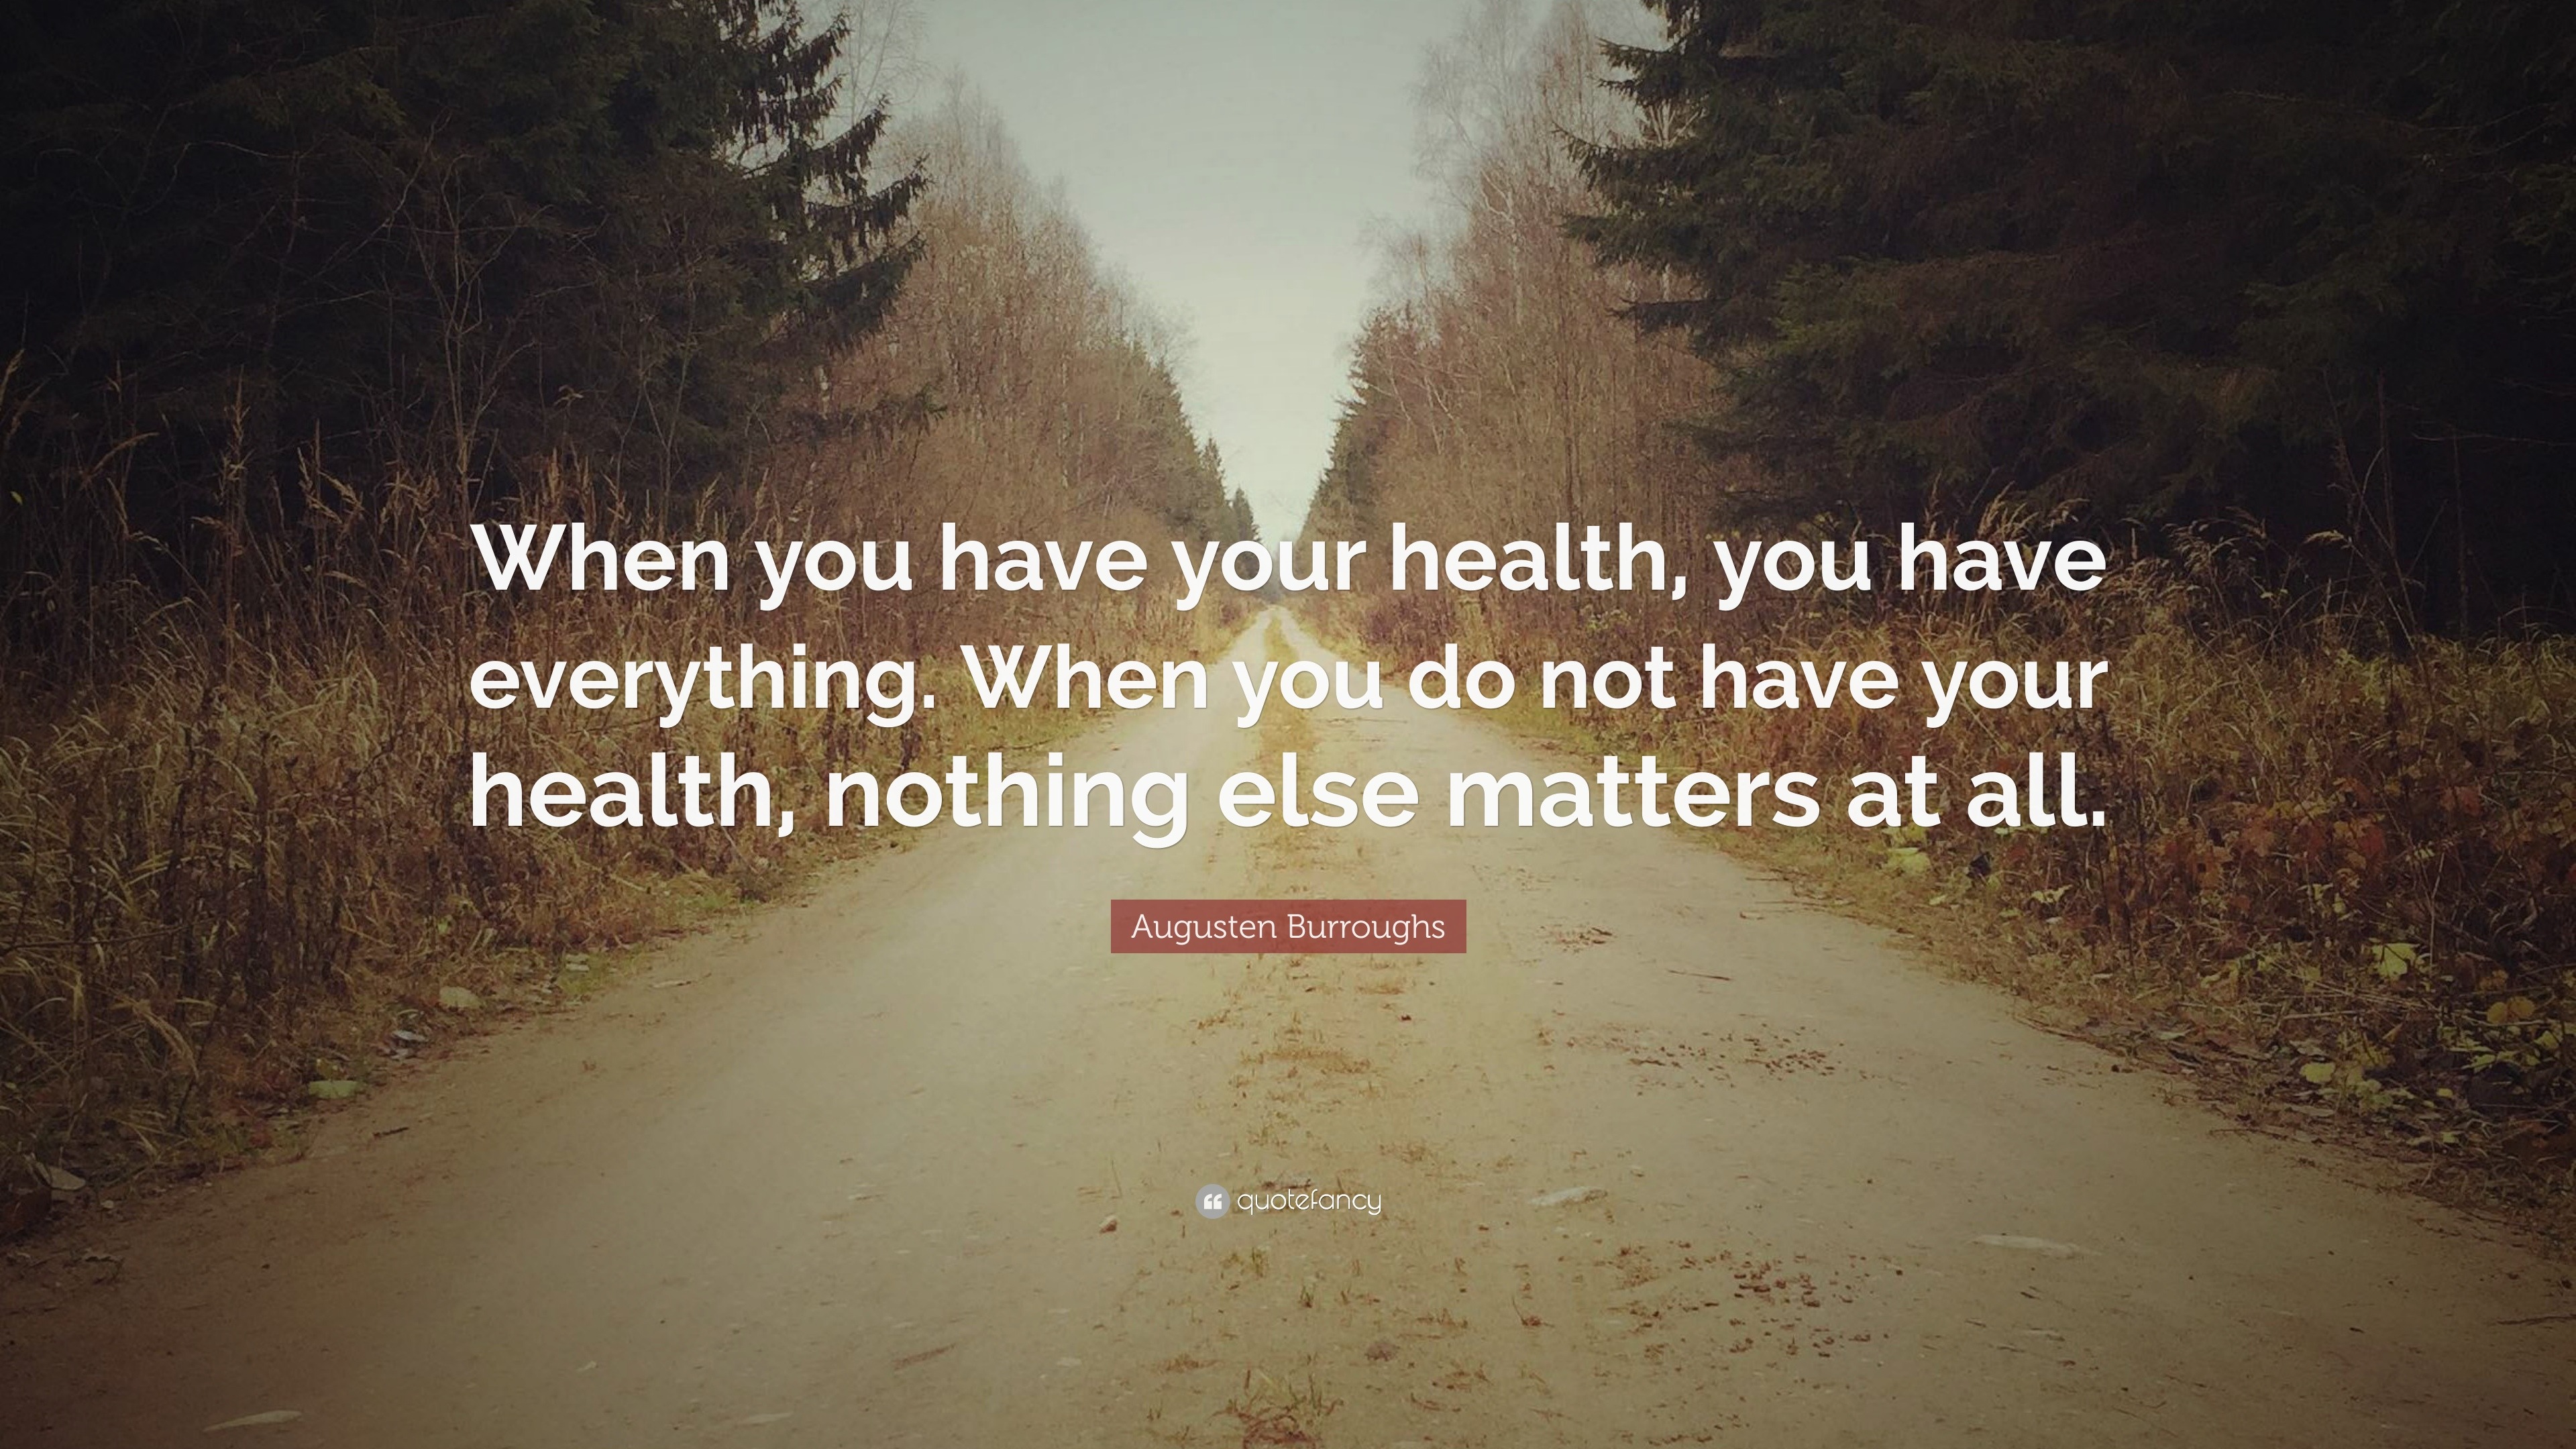 Augusten Burroughs Quote: "When you have your health, you have ...